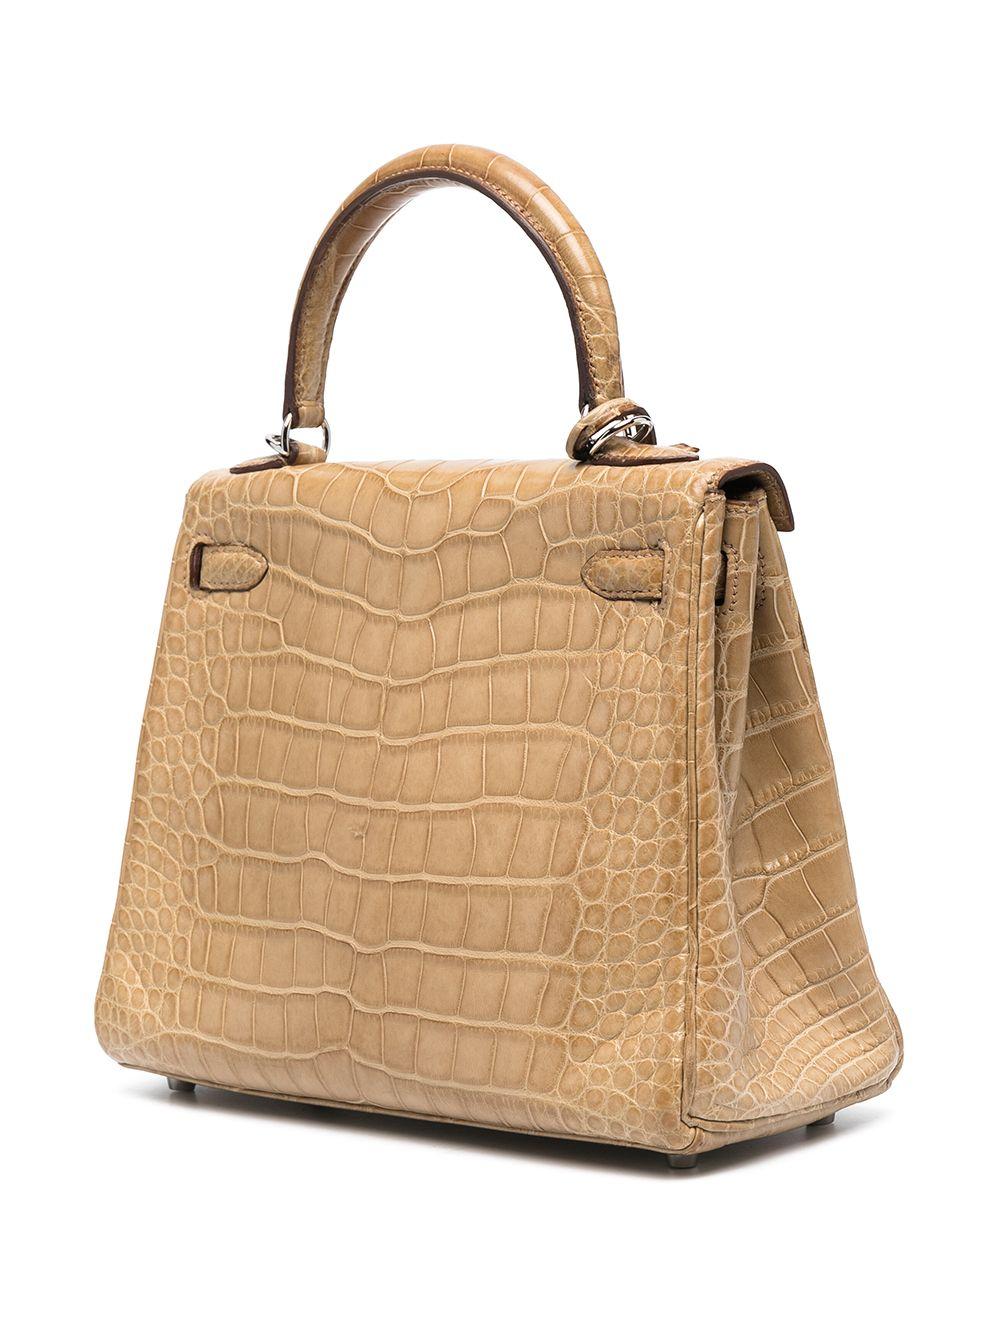 Expertly crafted in France from a matte Poussiere Alligator Mississippiensis leather, a favoured Hermès hide for its large, square, rougher ridged scales and durability against scuffing and scratching, this Hermès Kelly Retourne bag is a true